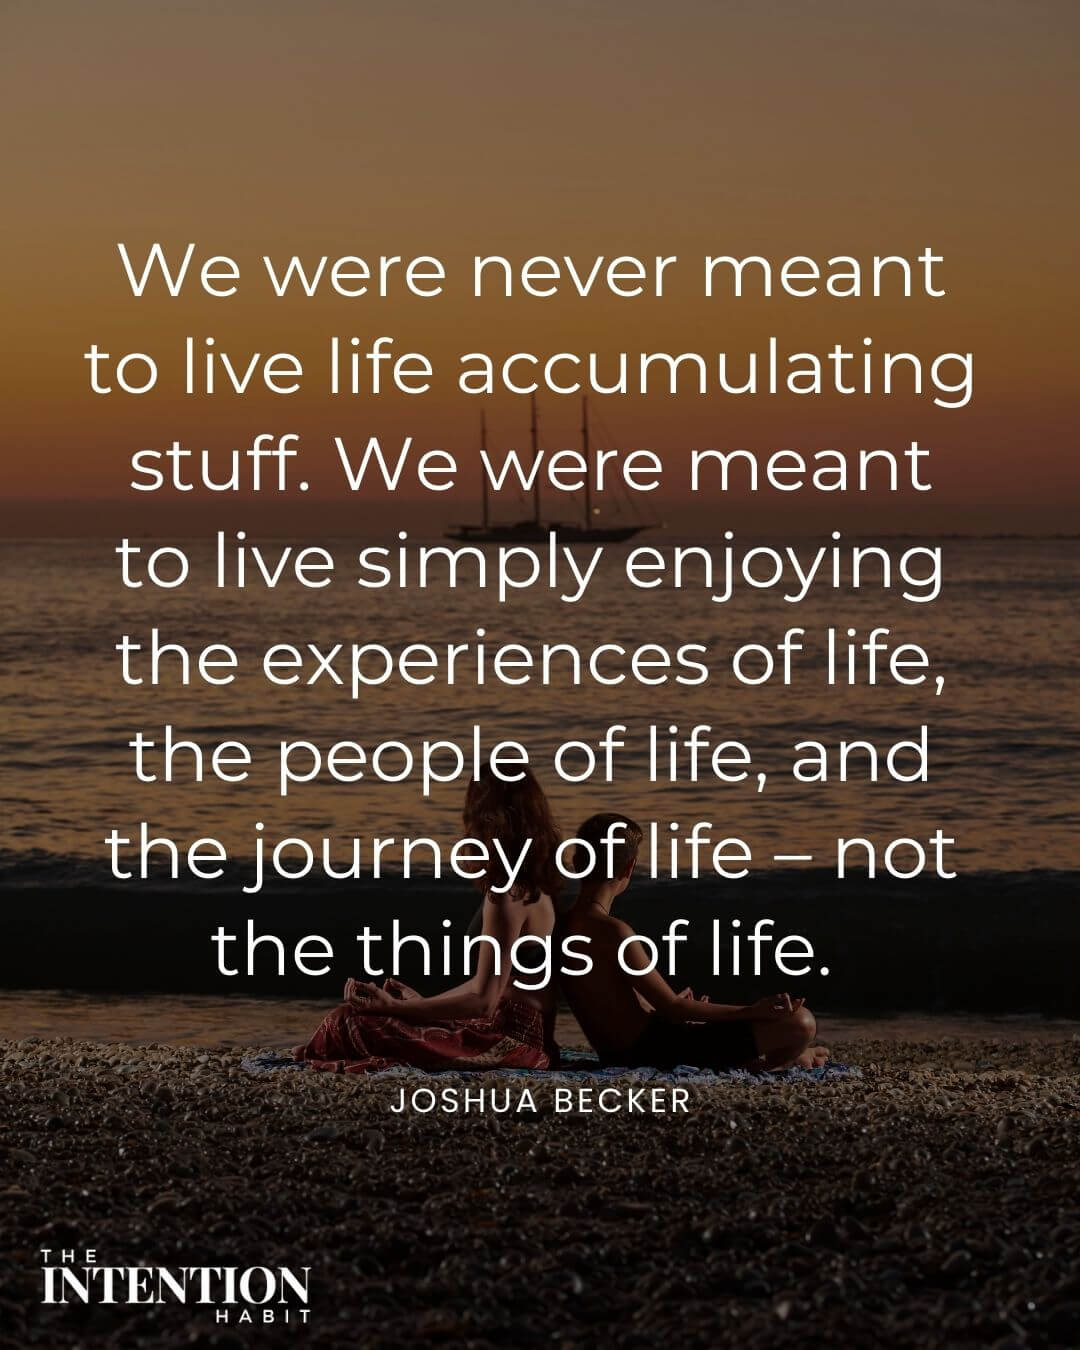 Intentional living quote - we were never meant to live life accumulating stuff. We were meant to live simply enjoying the experiences of life. The people of life and the journey of life - not the things of life